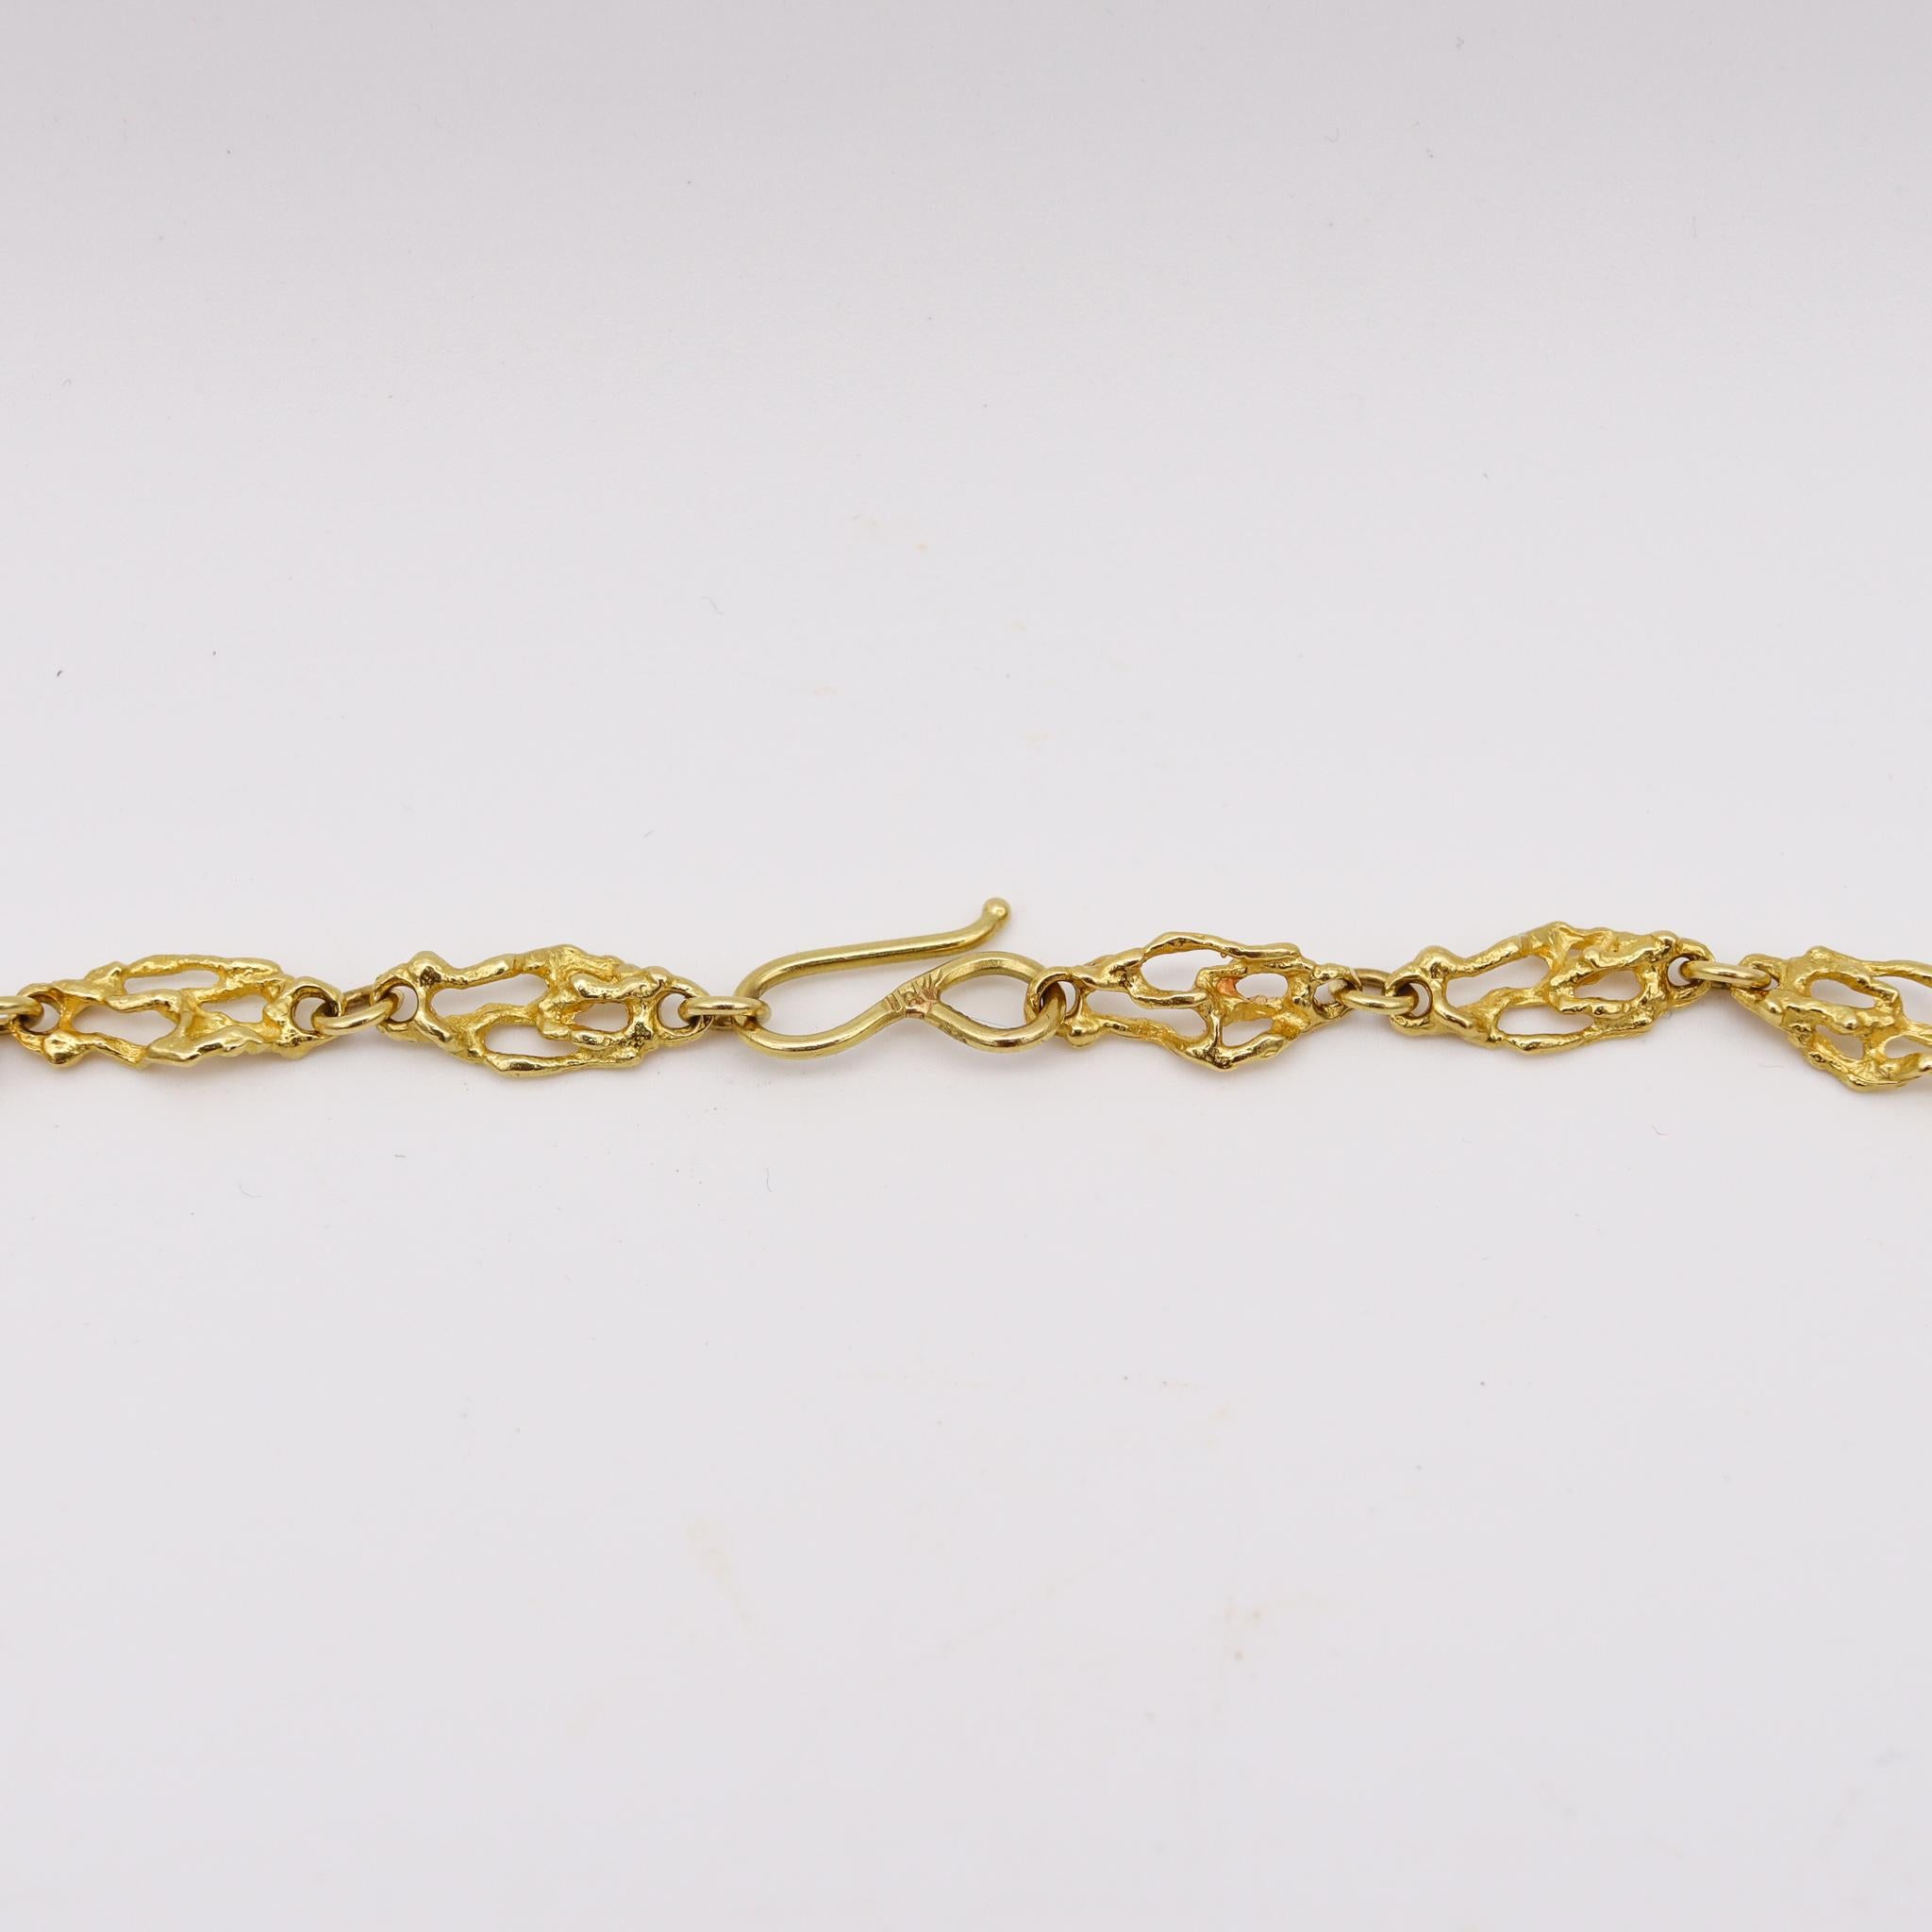 Retro 1970 Modernist Chain with Organic Textured Links in 18Kt Yellow Gold In Excellent Condition For Sale In Miami, FL